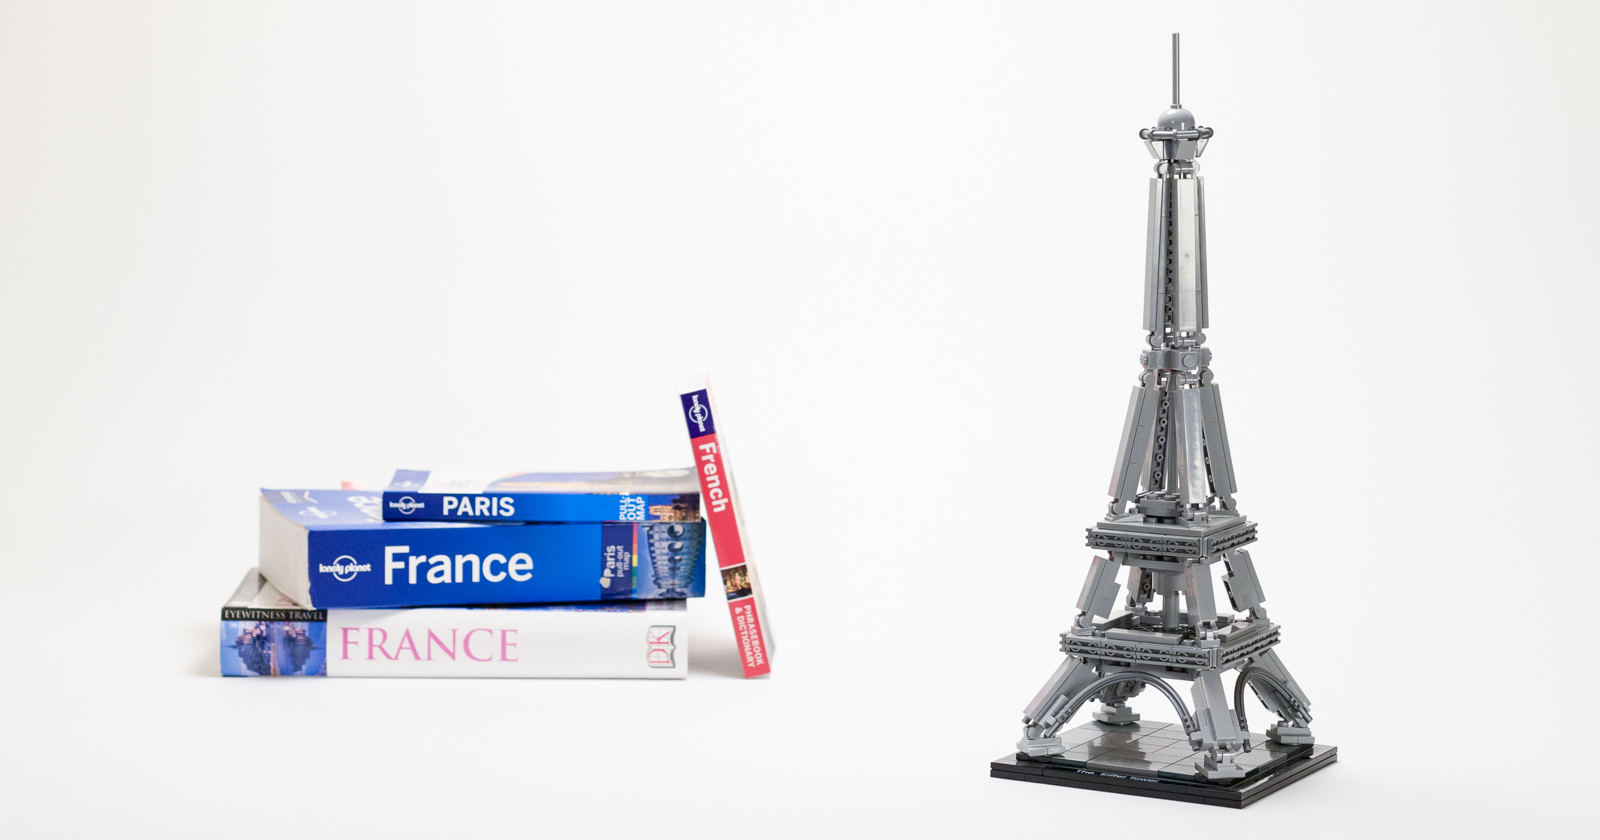 Review: #21019 Eiffel Tower - ARCHITECT